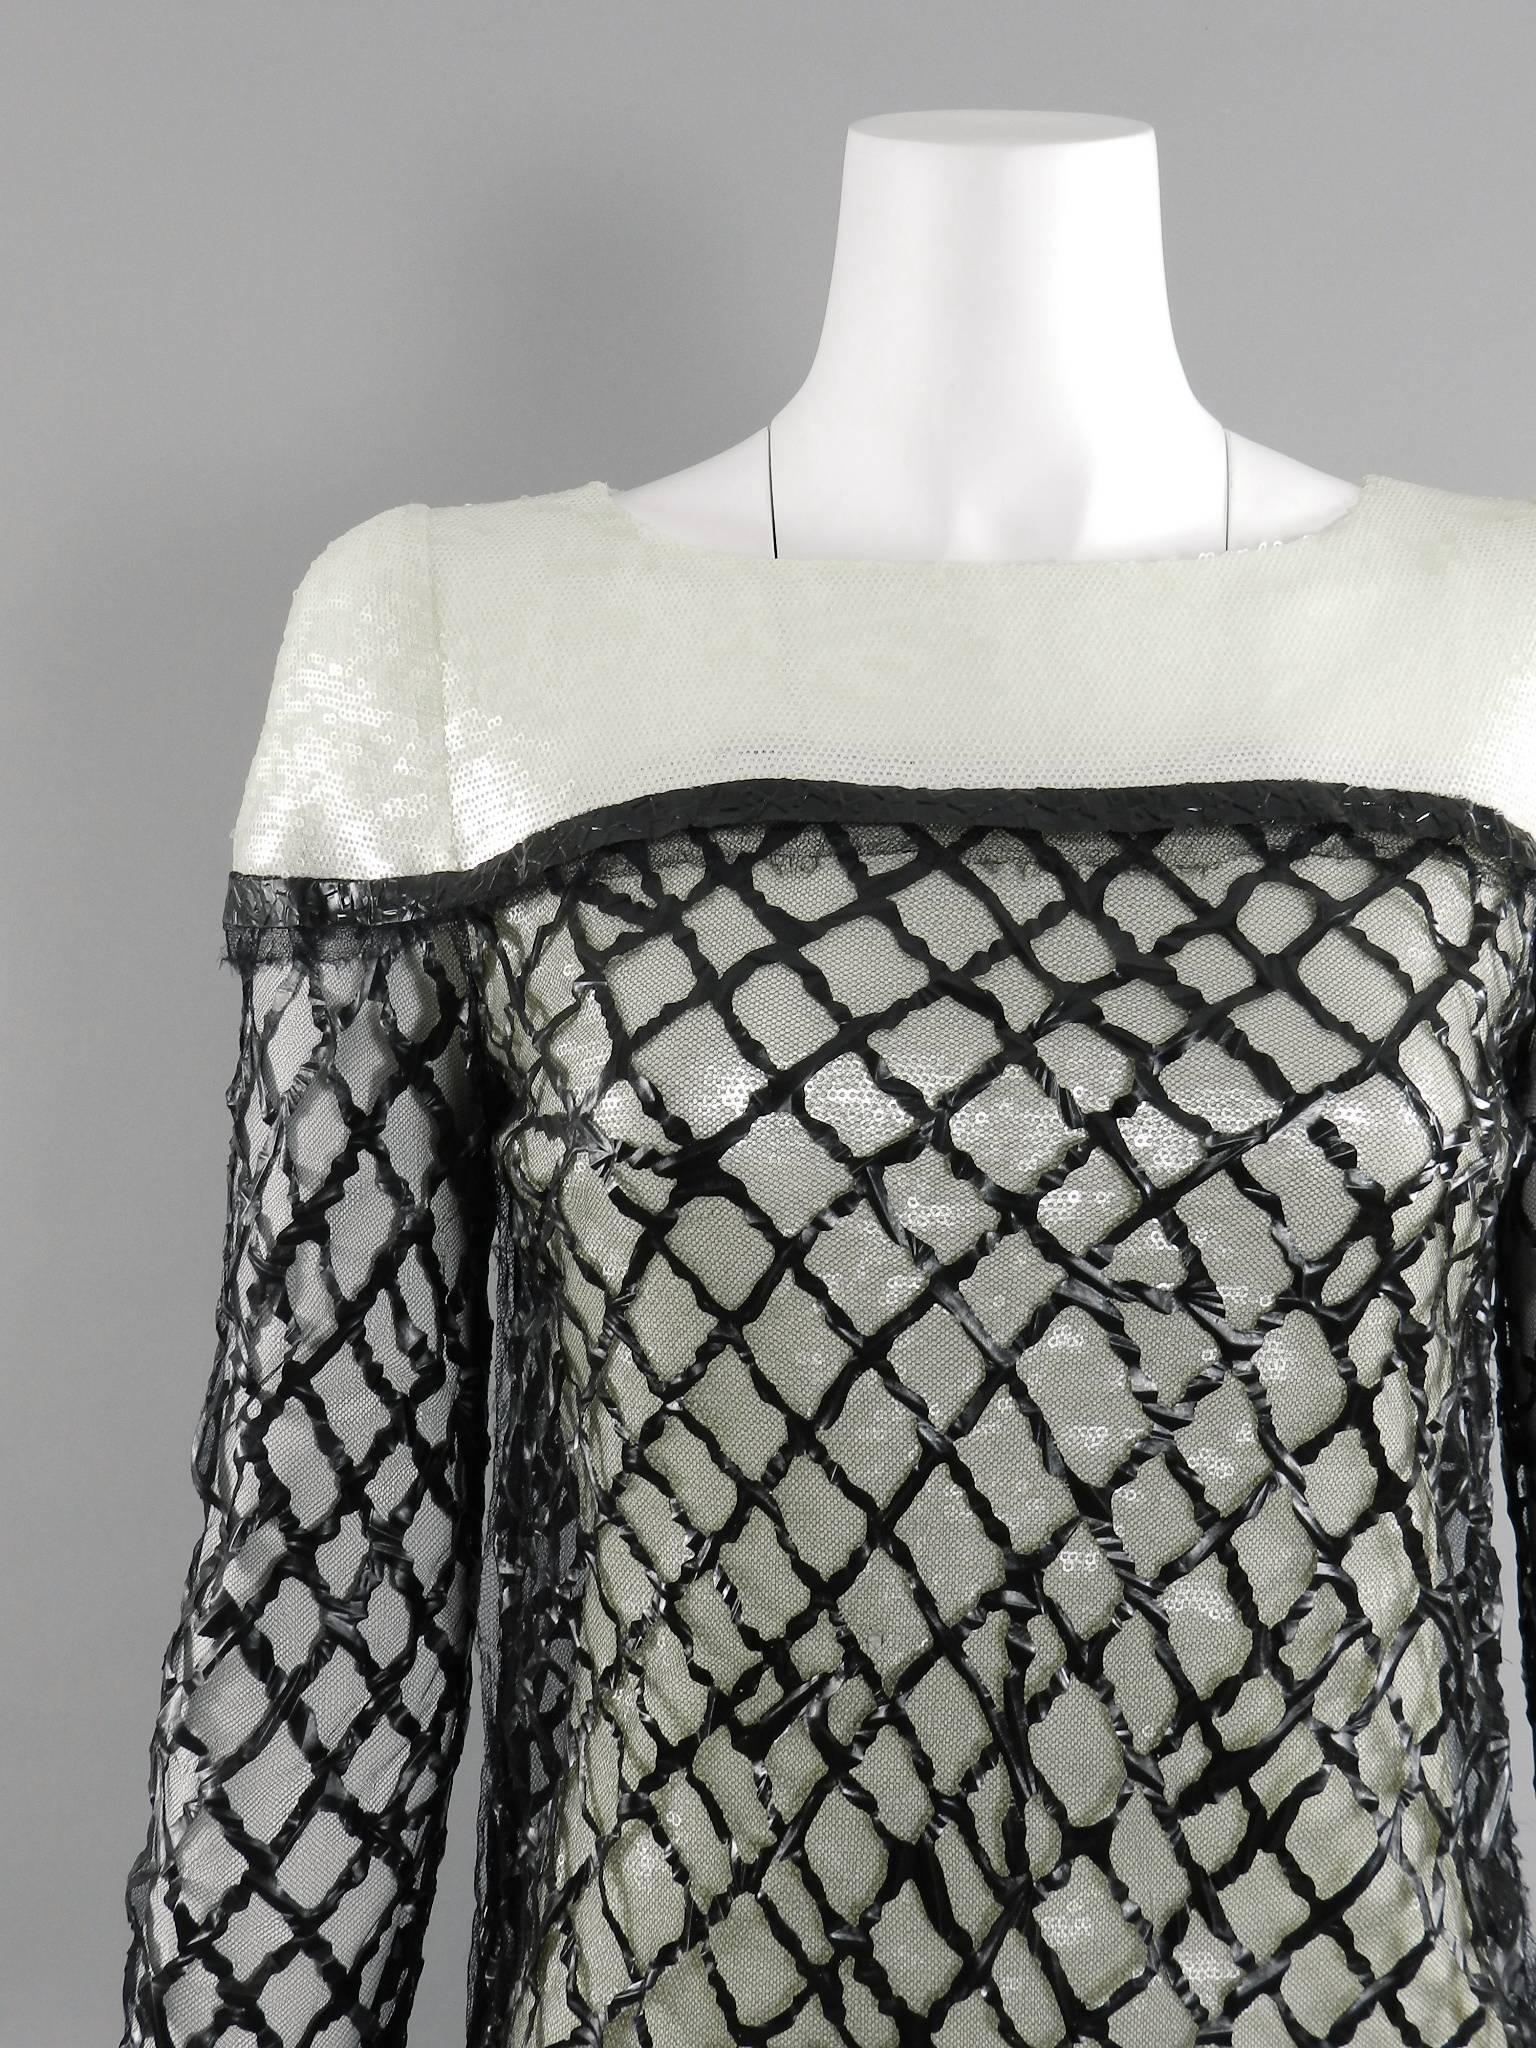 Women's Chanel 09P White Sequin Runway Dress with Black Rubber Mesh Overlay